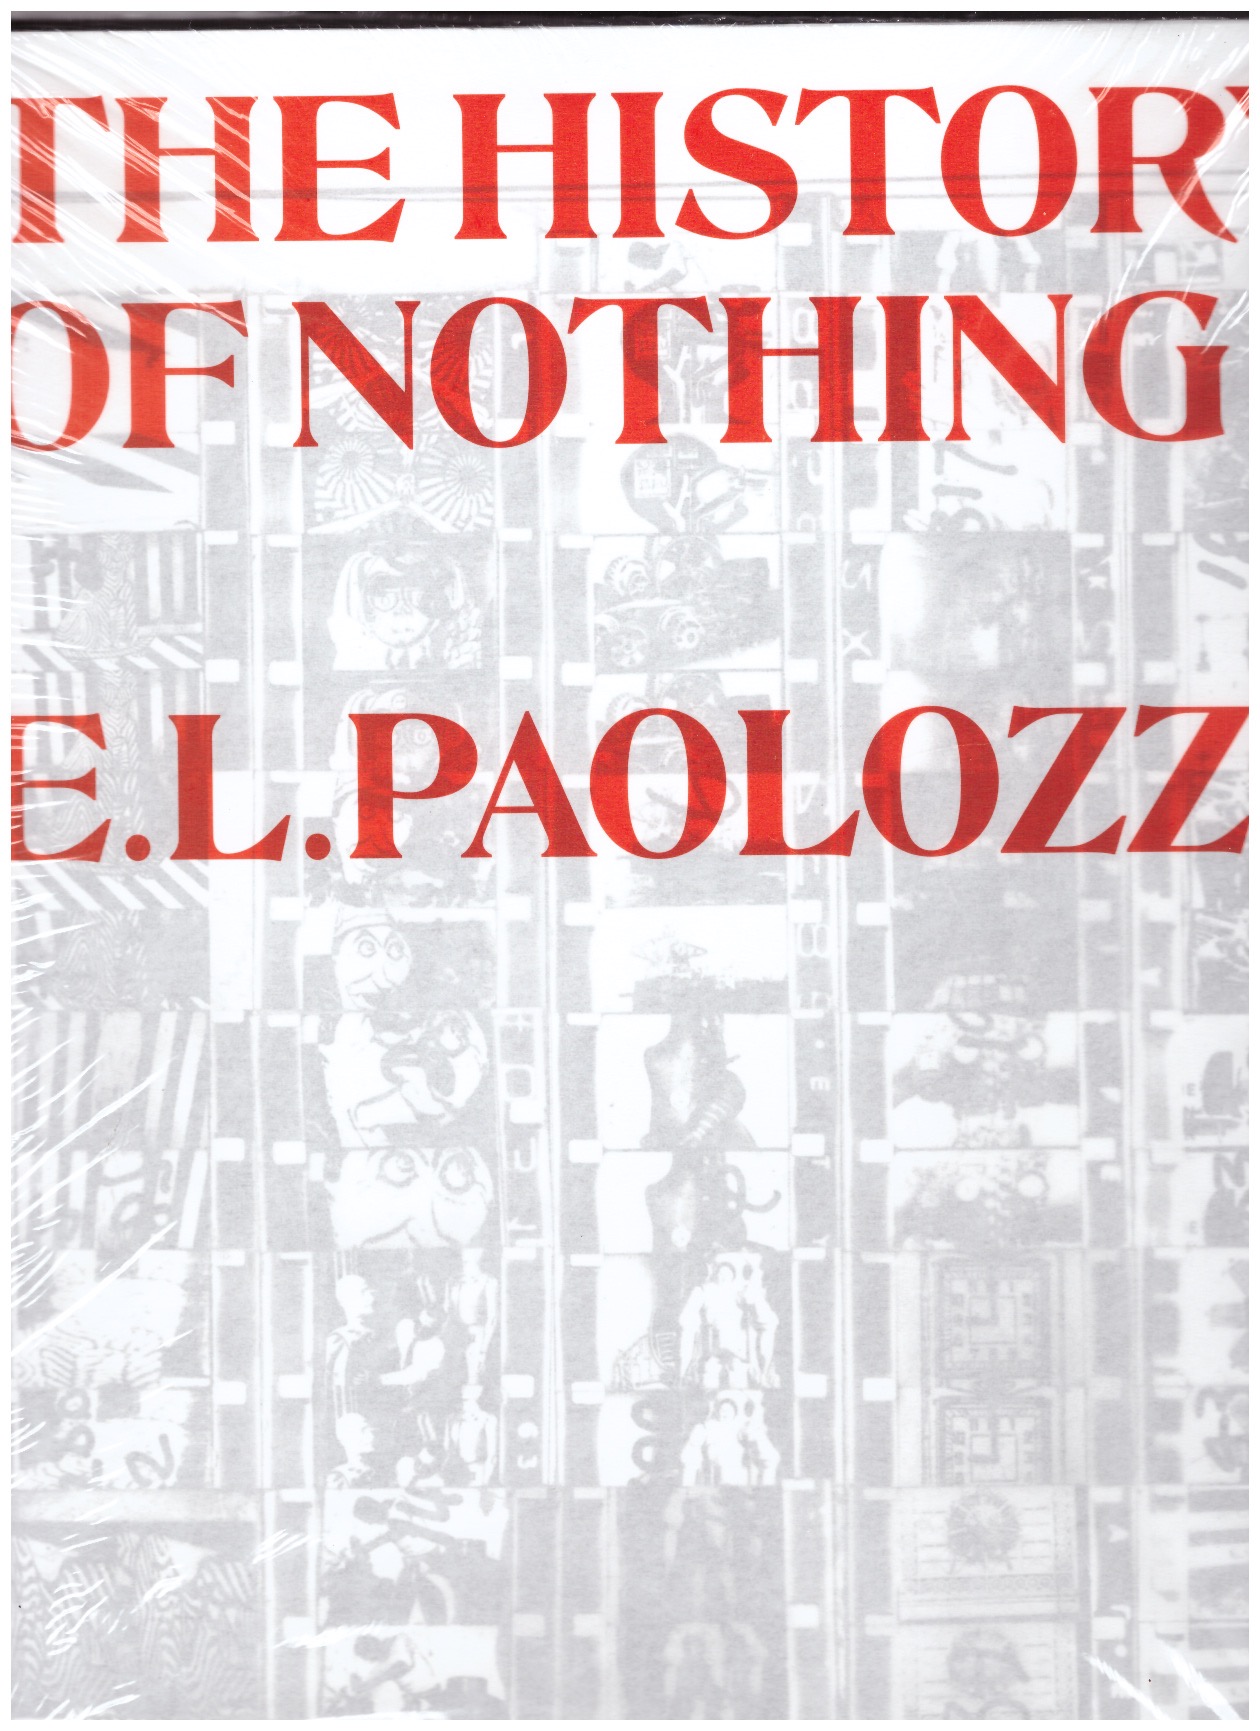 REICHARDT, Jasia (ed) - The History of Nothing and Other Excursions. Eduardo Paolozzi